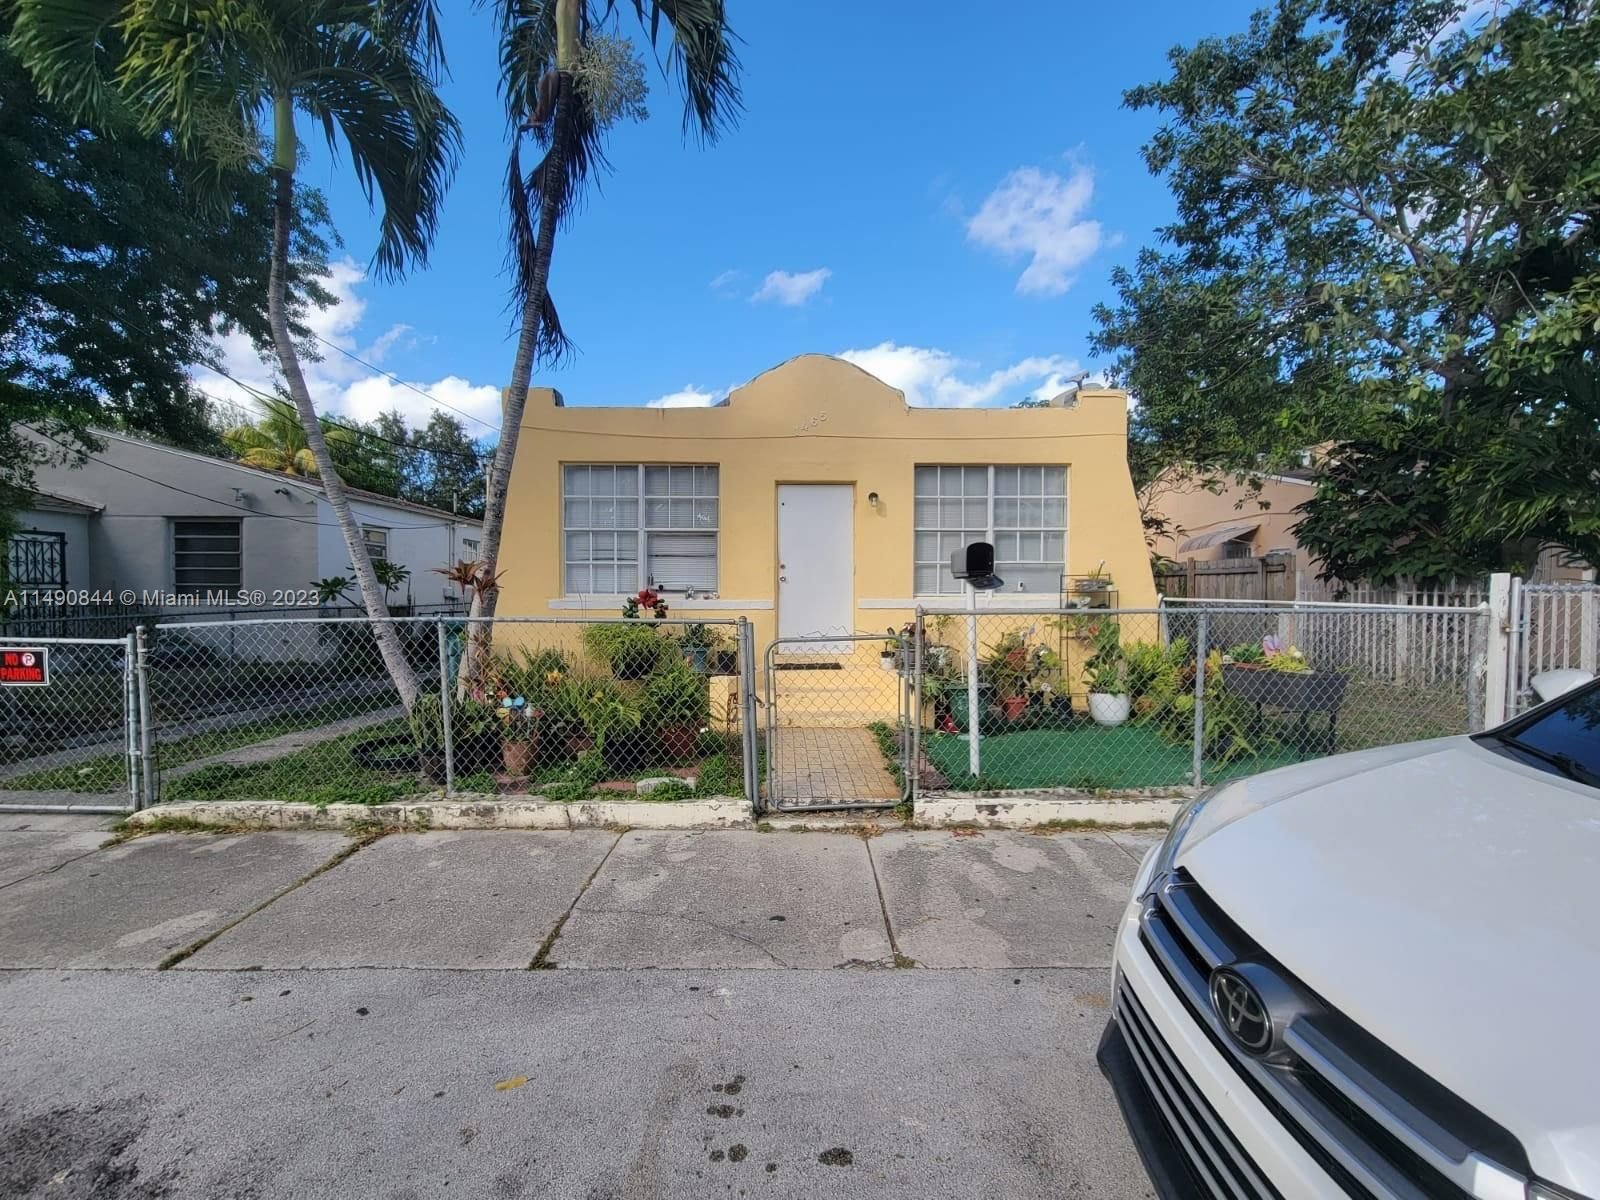 Real estate property located at 1465 33rd St, Miami-Dade County, Miami, FL